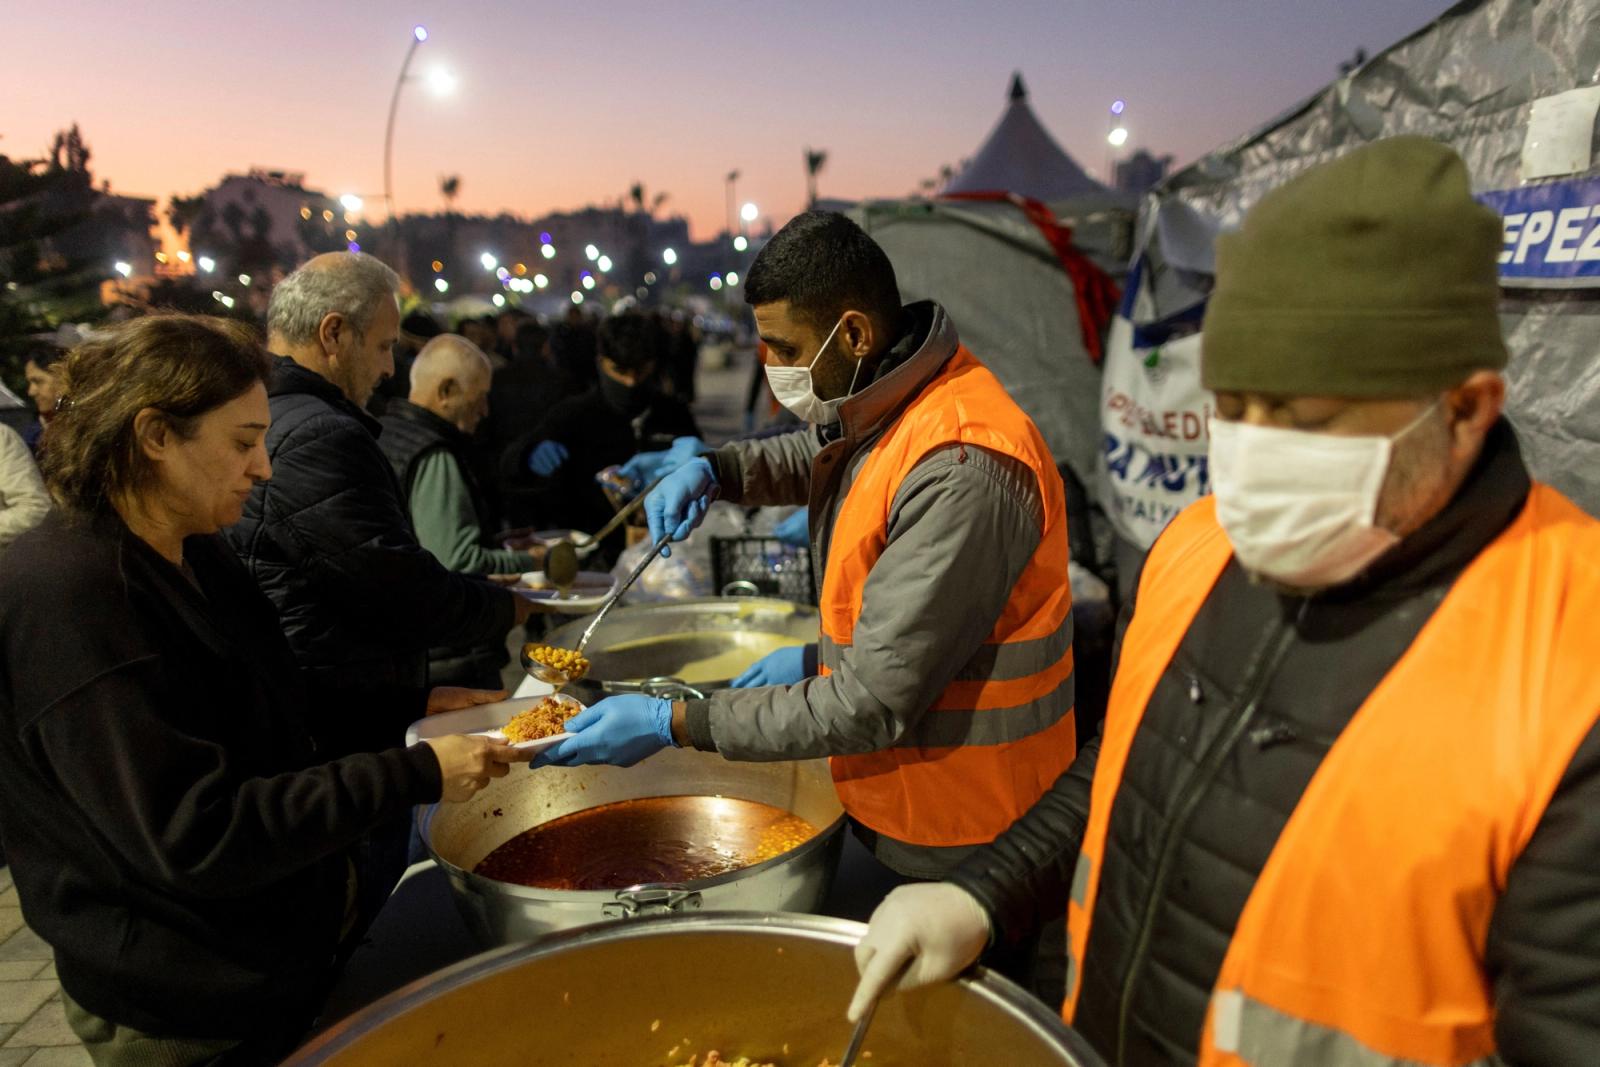 Volunteers serve food at a park turned into a camp for displaced people, following the deadly earthquake, in Iskenderun city, Hatay province, Turkey, February 14, 2023.